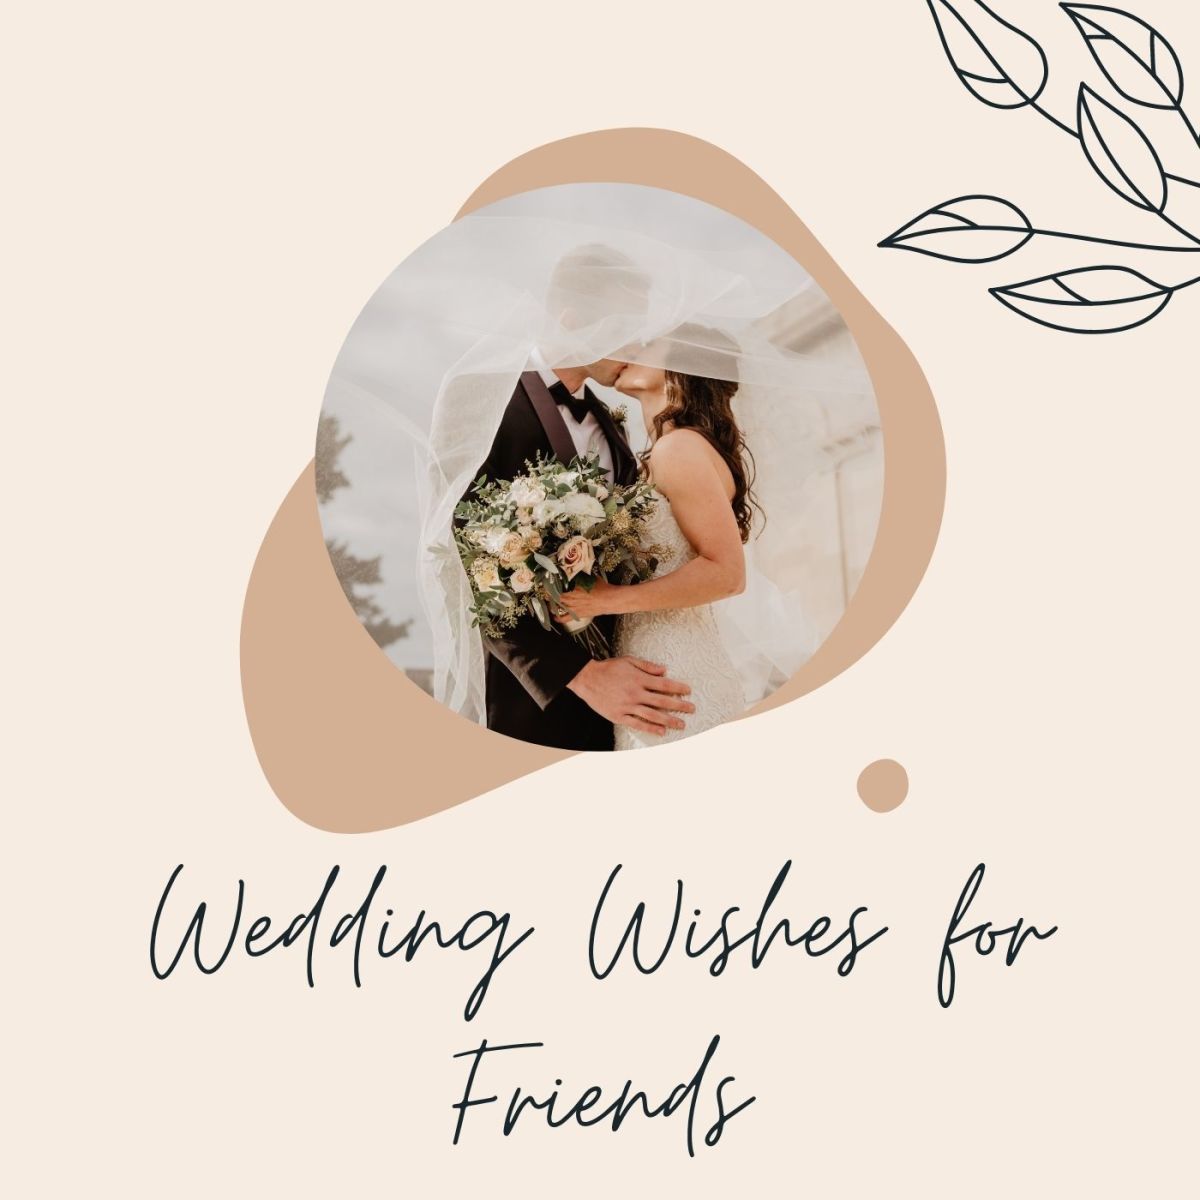 14 Heartfelt Wedding Wishes and Messages for Your Friends